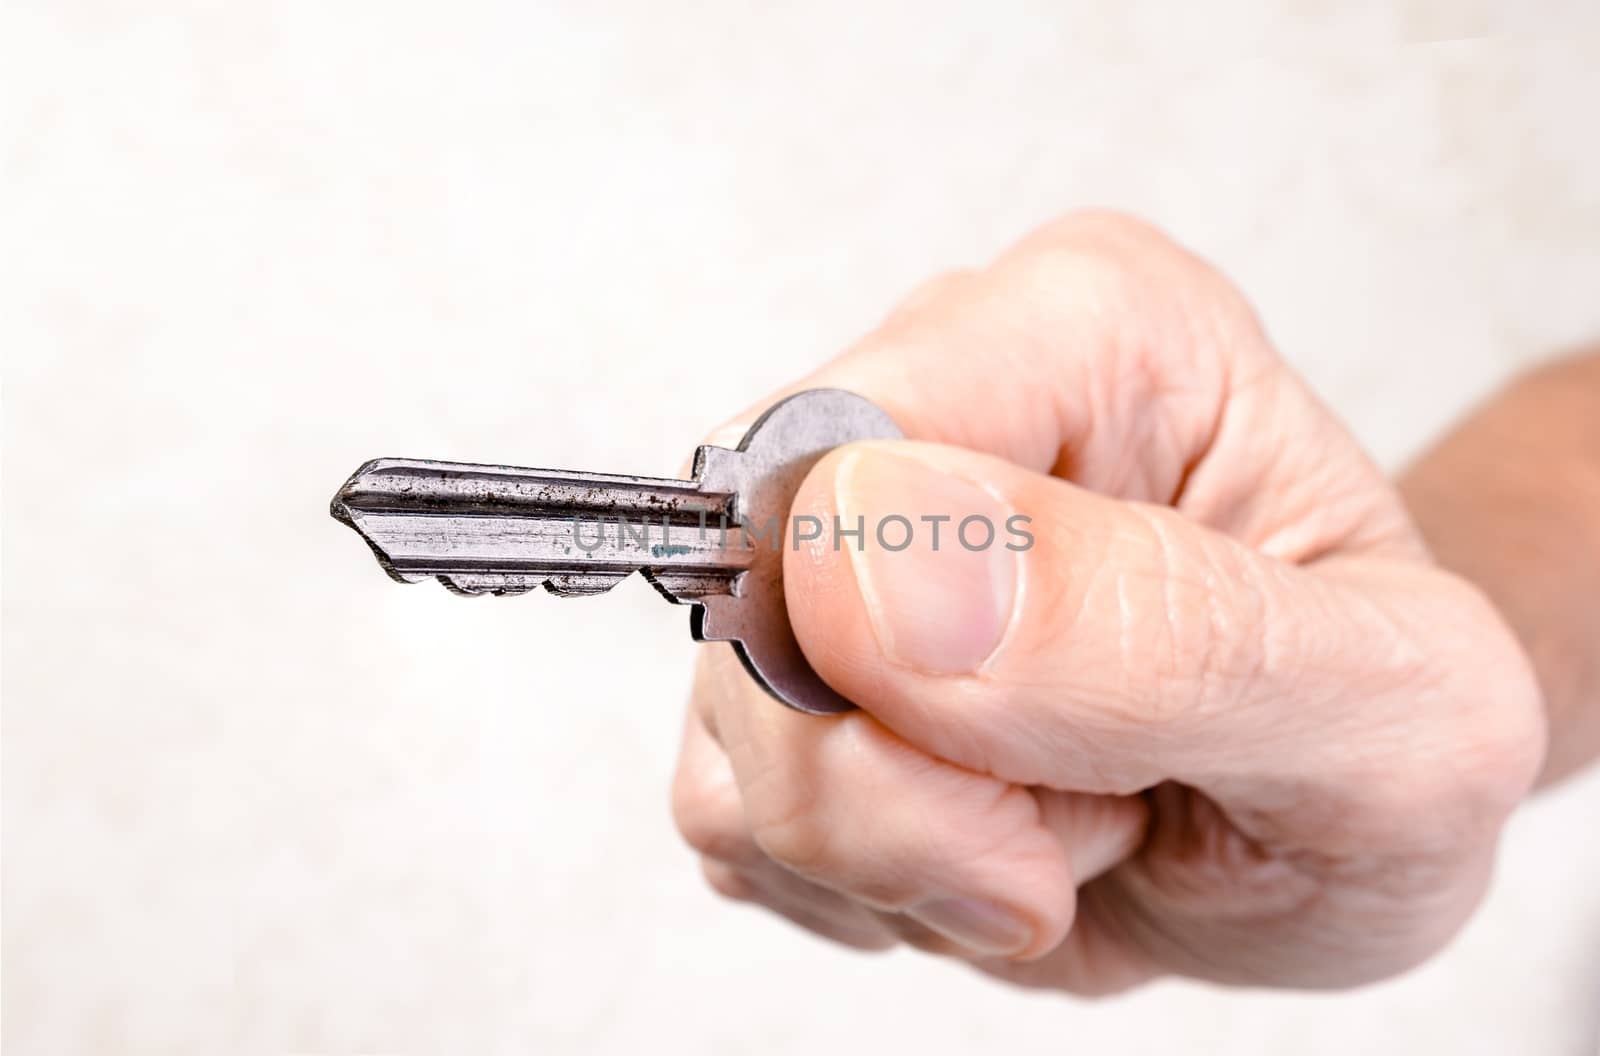 A man's hand is holding a key, opening or closing a door, on light background